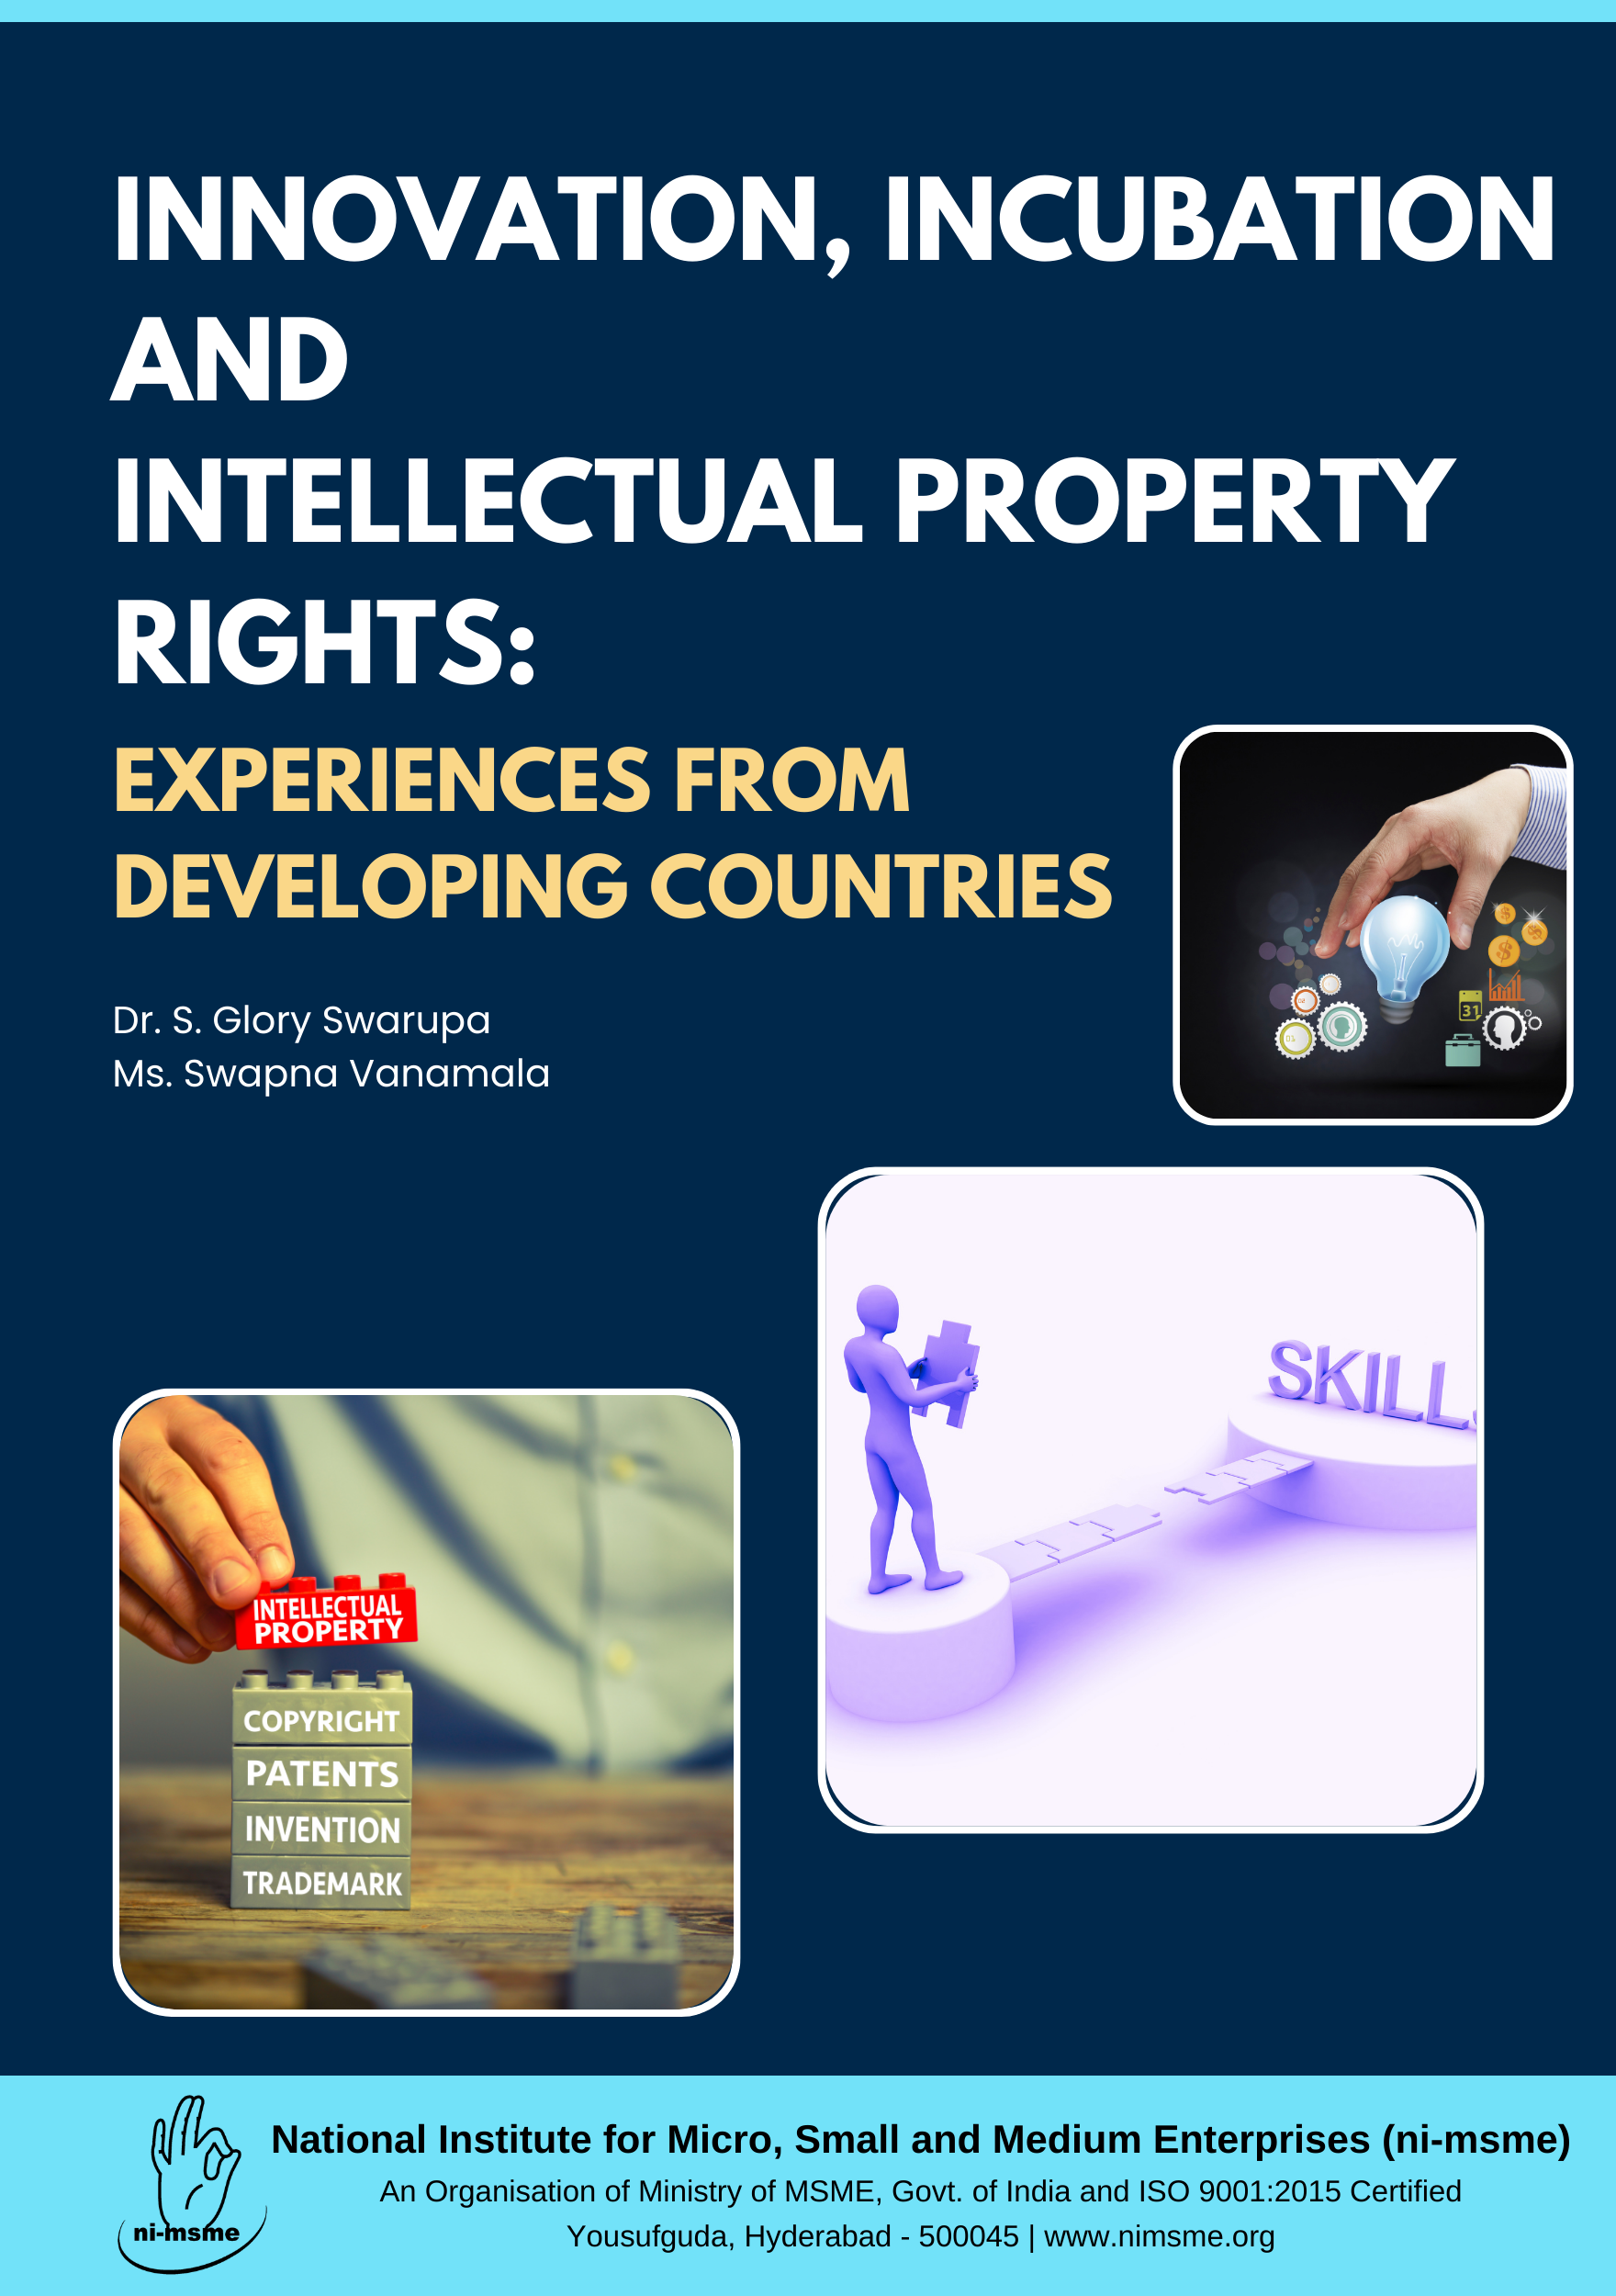 Innovation, Incubation and Intellectual Property Rights: Experiences of Developing Countries